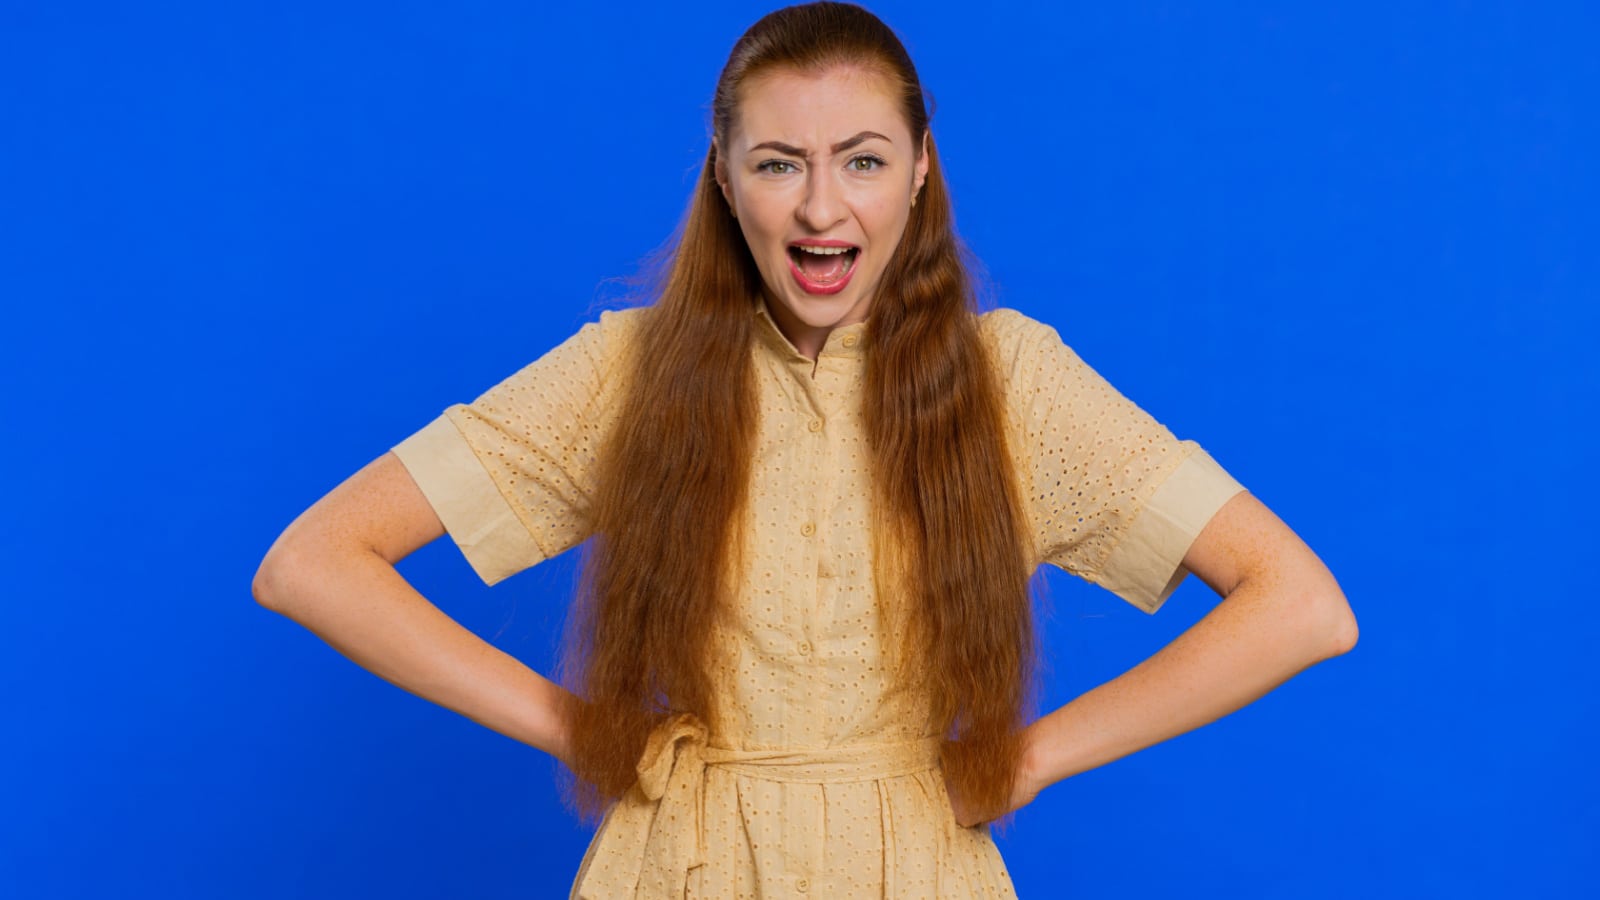 Offended sad nervous woman having misunderstanding, frustrated after quarrel, fail, lose, ignores and does not want to communicate, talk. Redhead girl isolated on blue background. People lifestyles